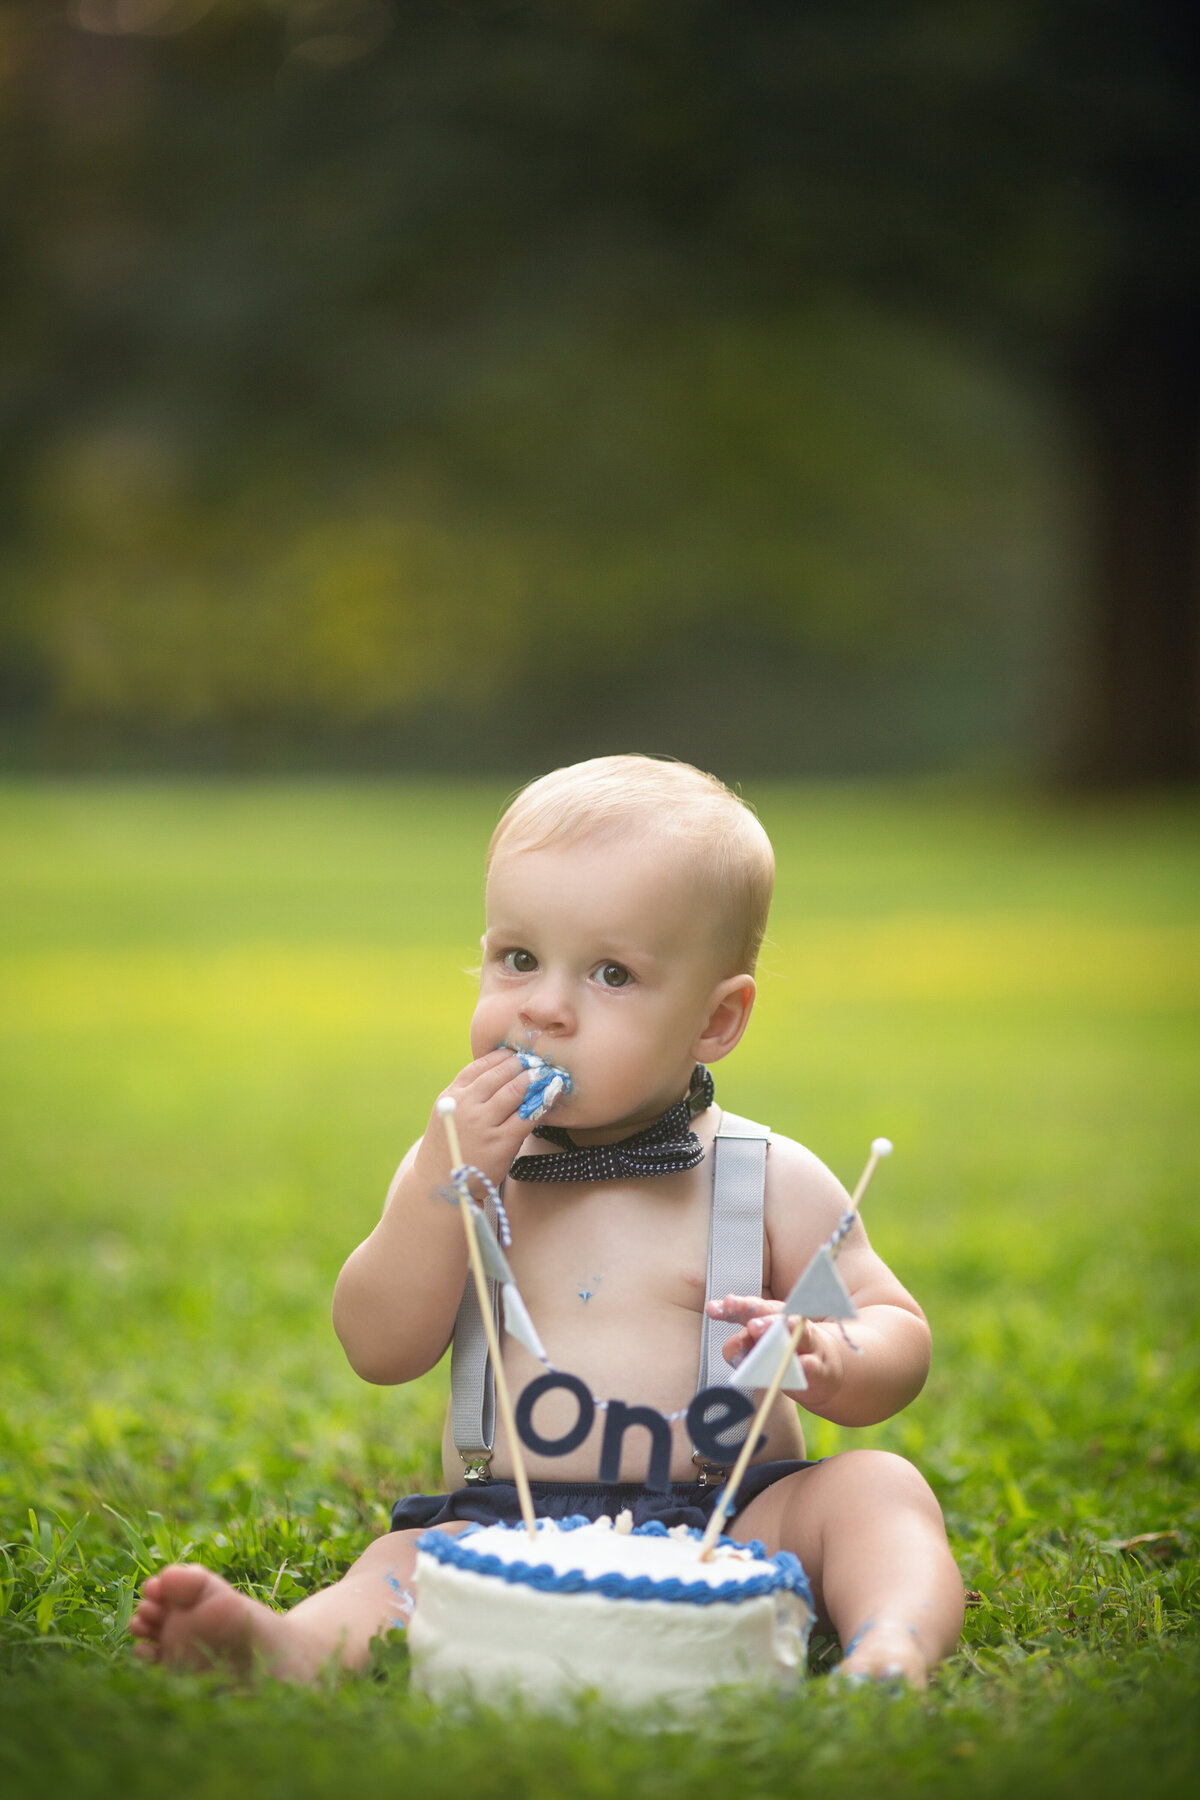 A young toddler boy celebrates his first birthday eating blue cake in a park lawn